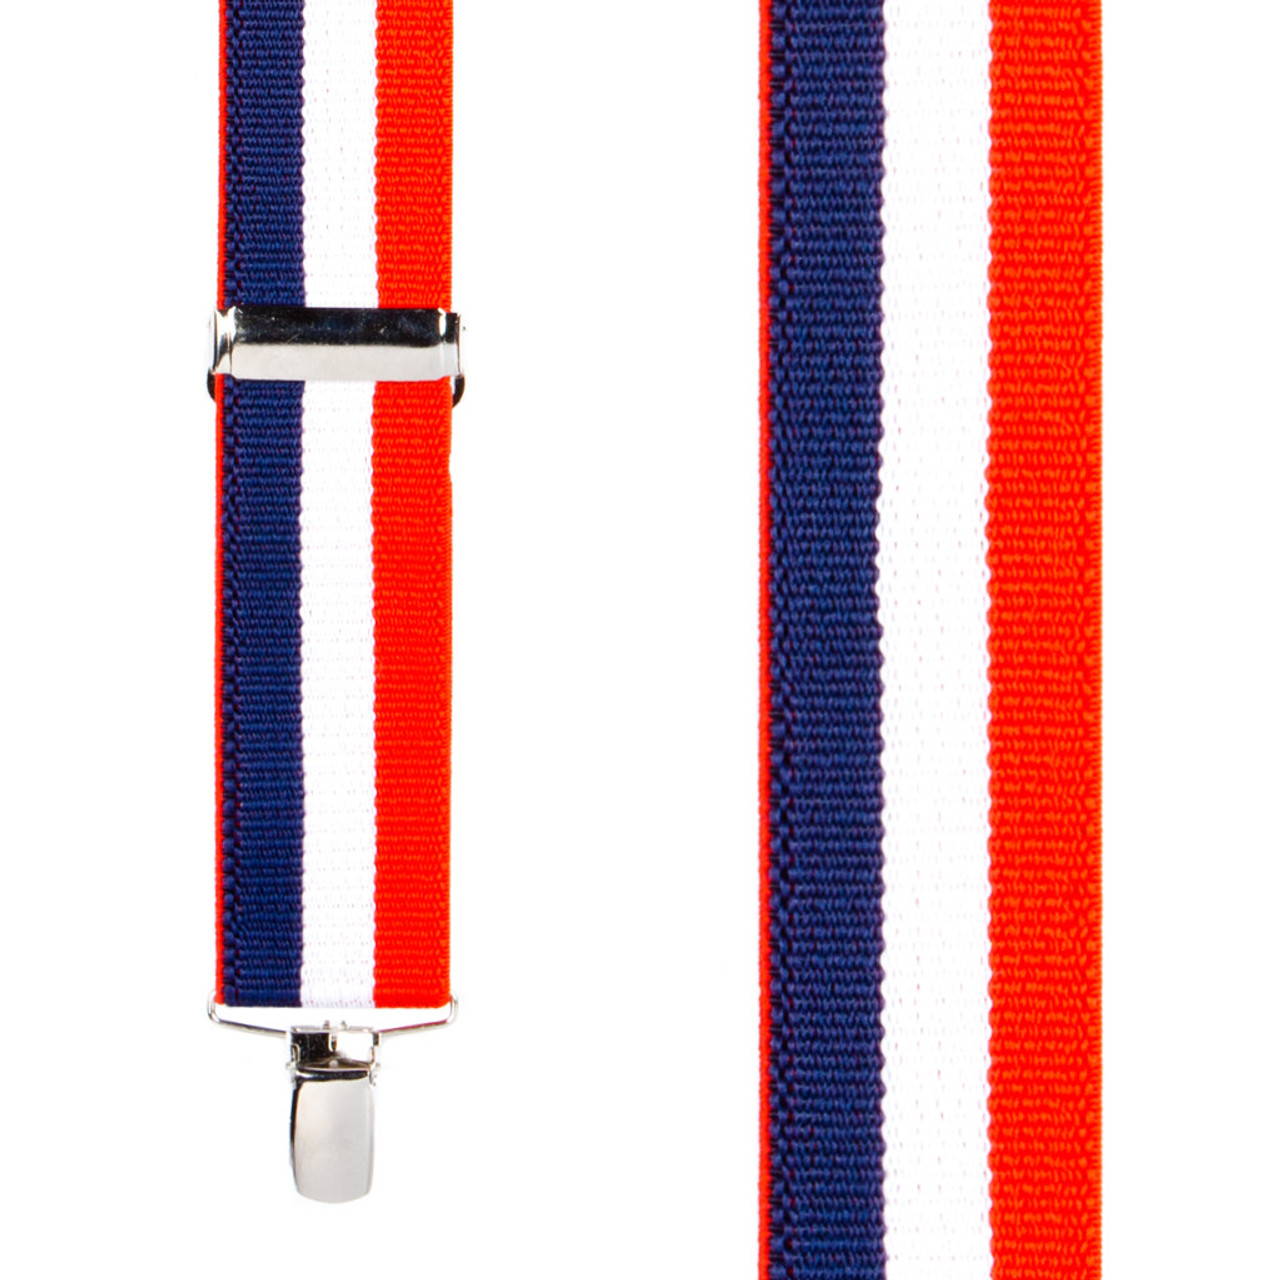 Silk suspenders with red and blue paisley pattern